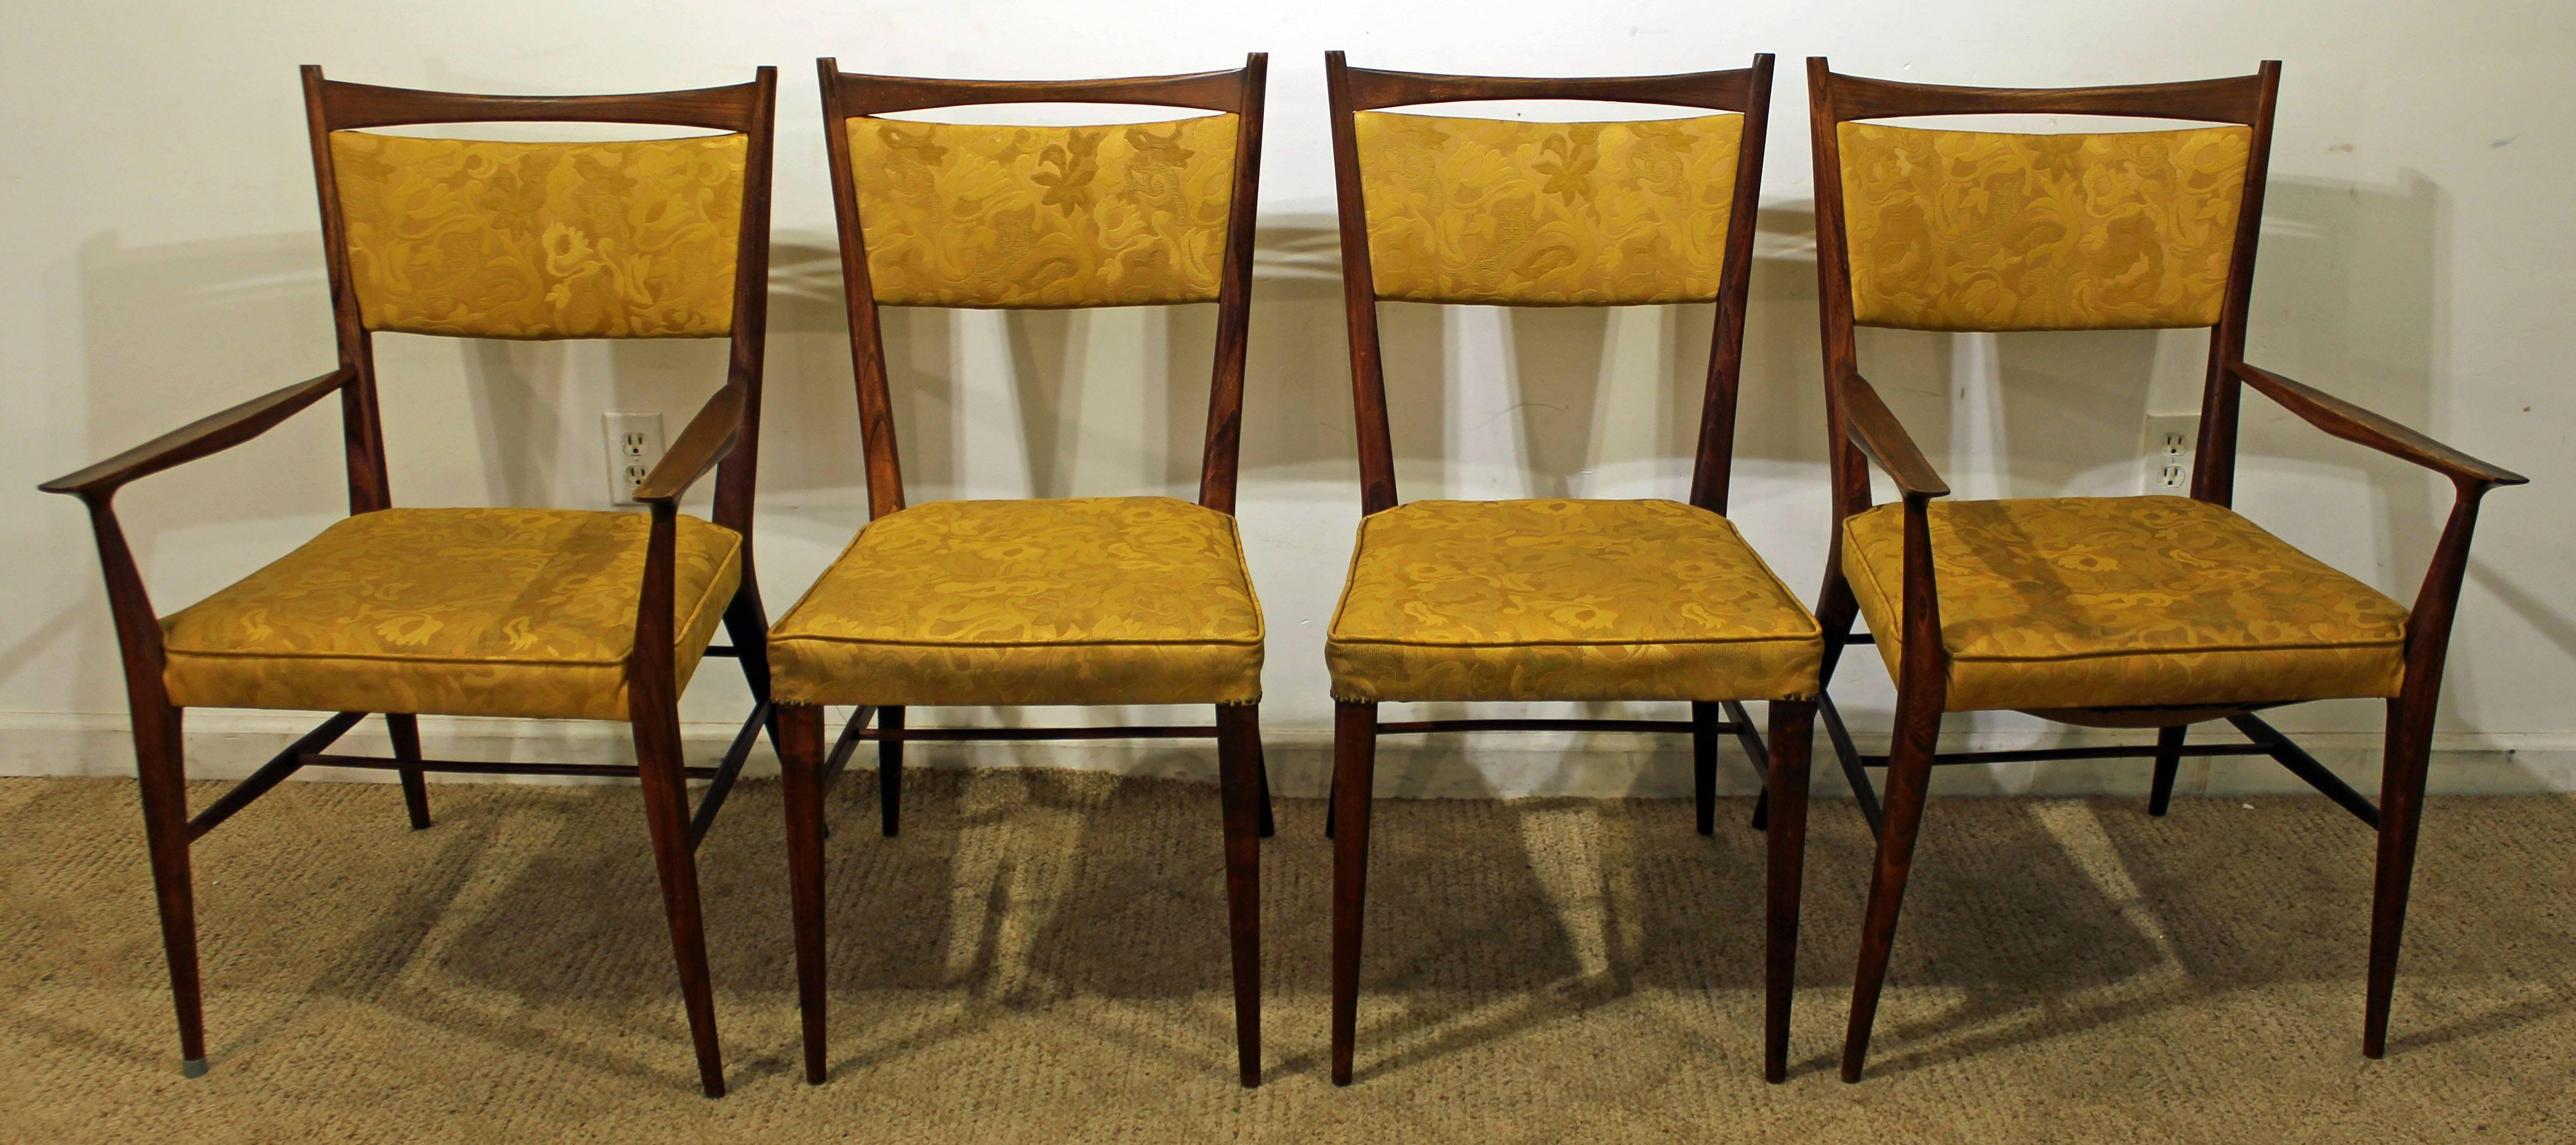 These chairs were designed by Paul McCobb for the Irwin collection by Calvin. They look to be walnut with vinyl upholstery.

Dimensions:
armchairs 23